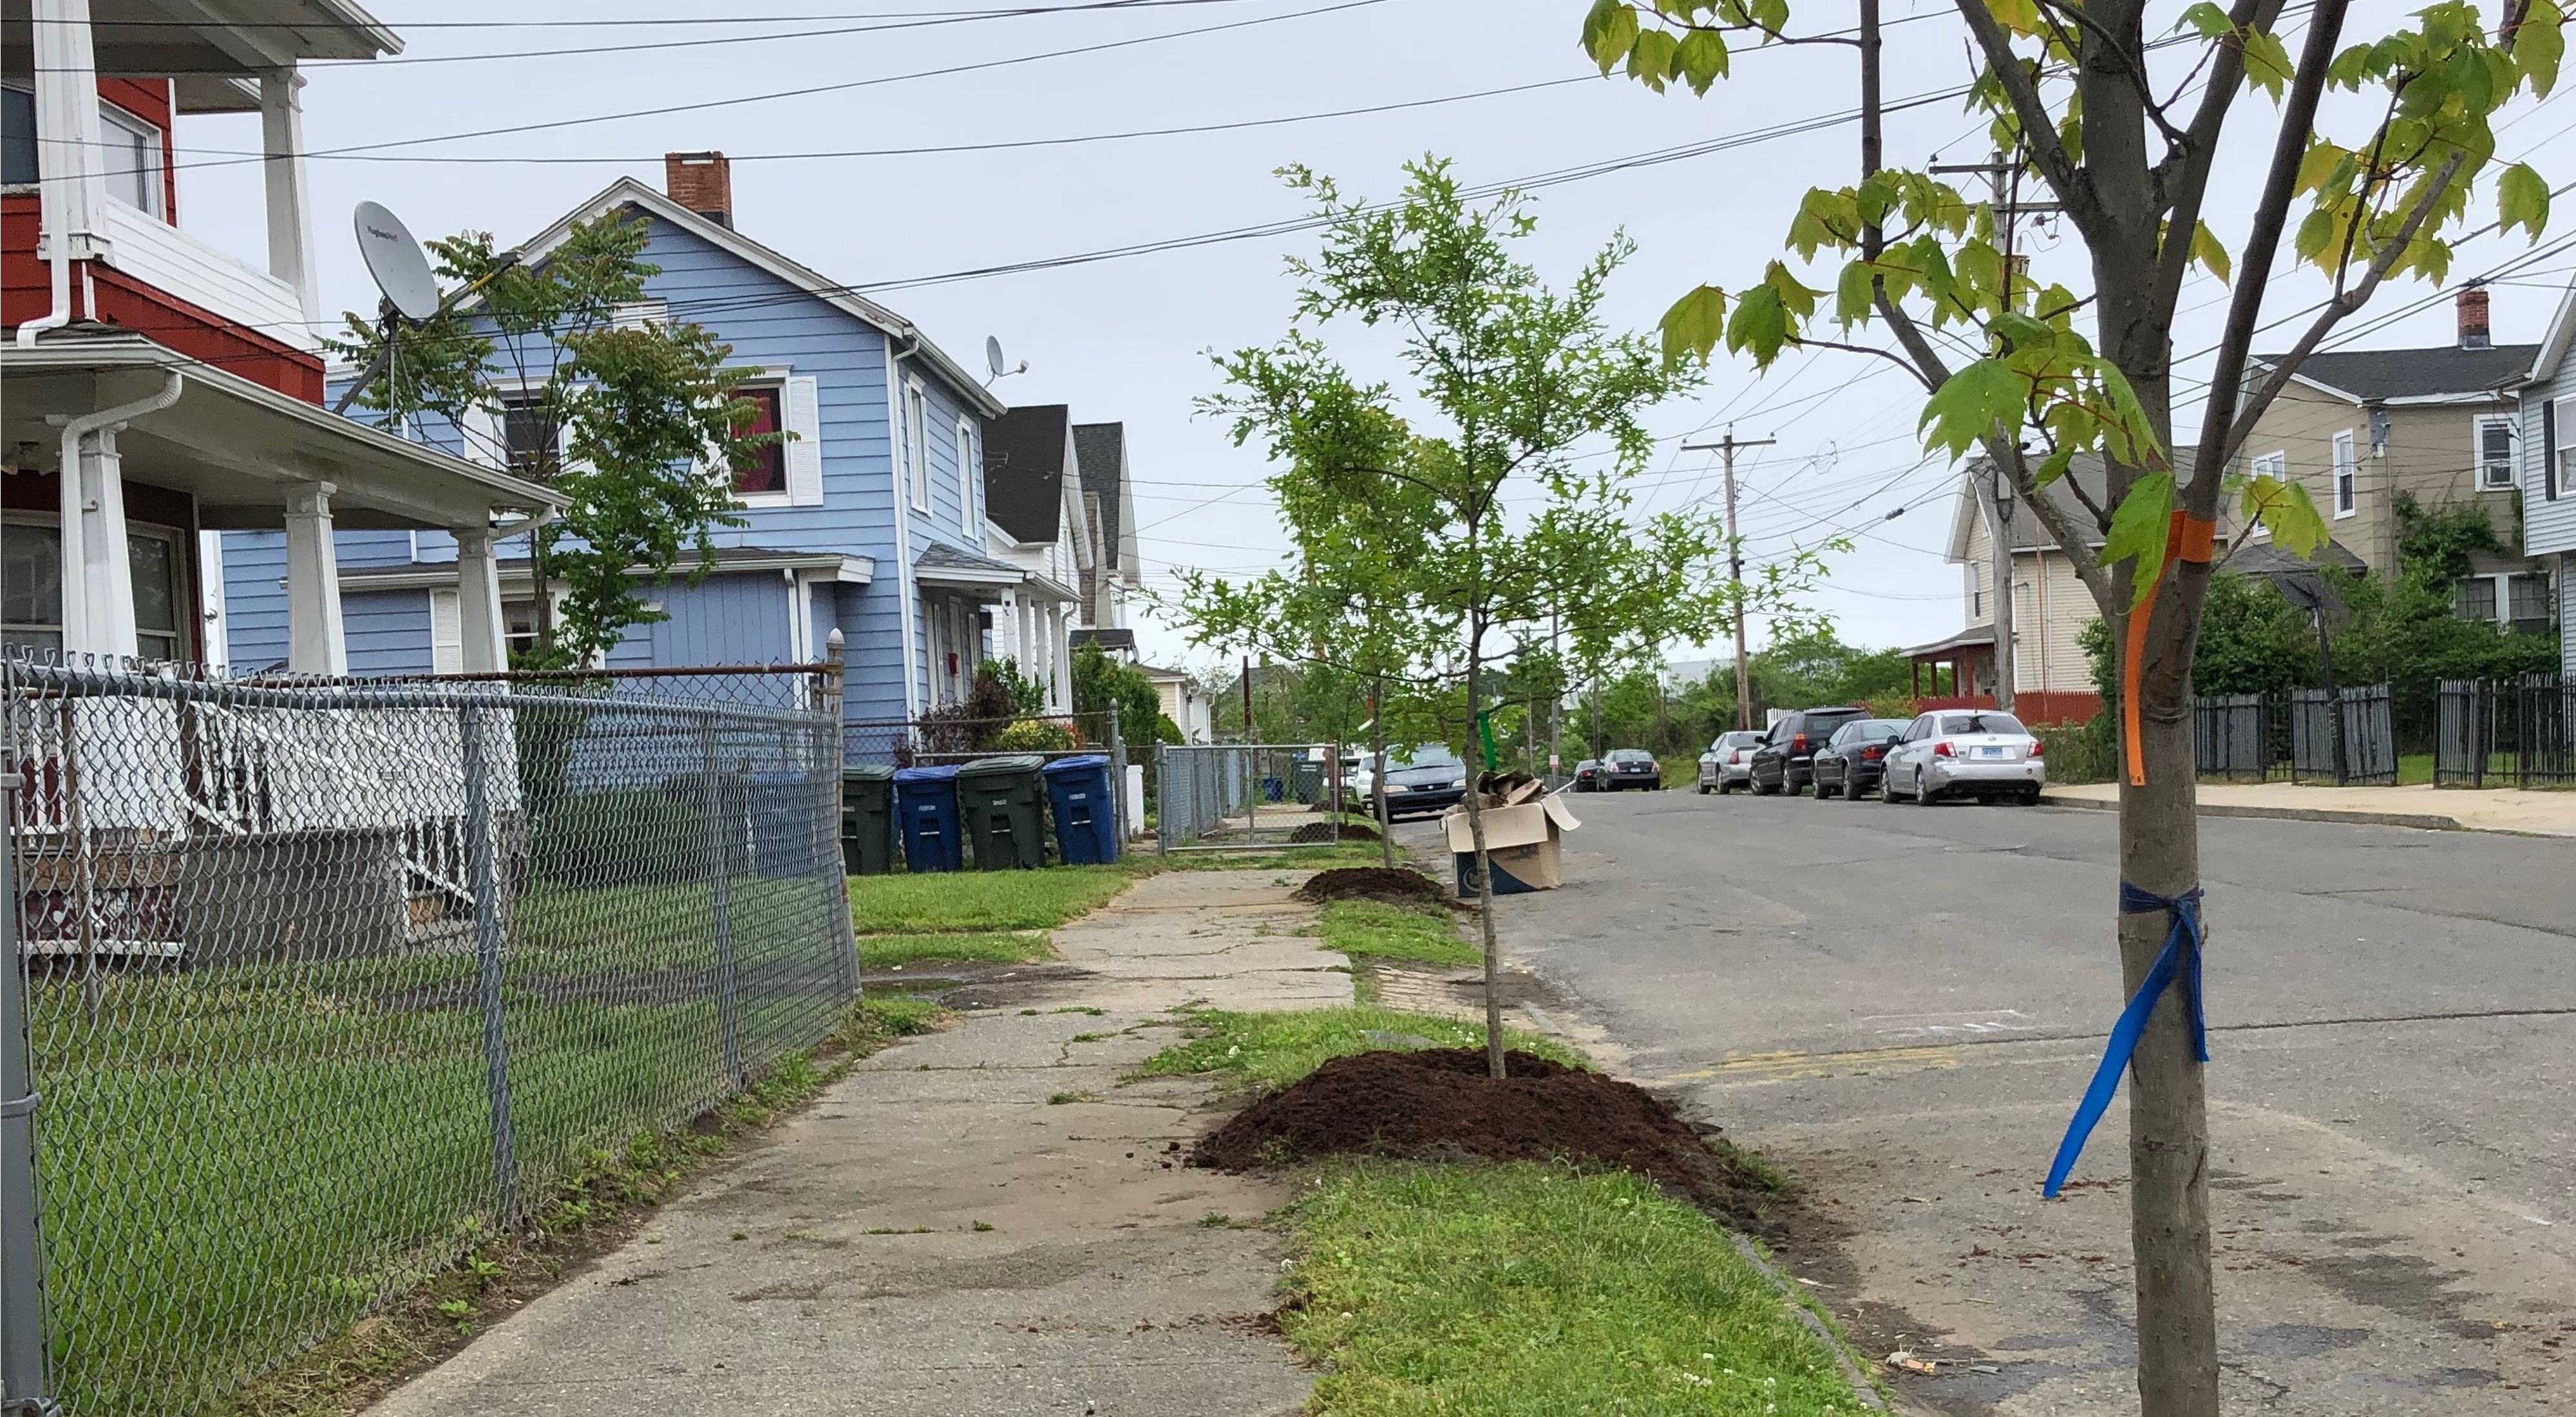 The Nature Conservancy is part of an initiative that is planting trees in places like Bridgeport, Connecticut.